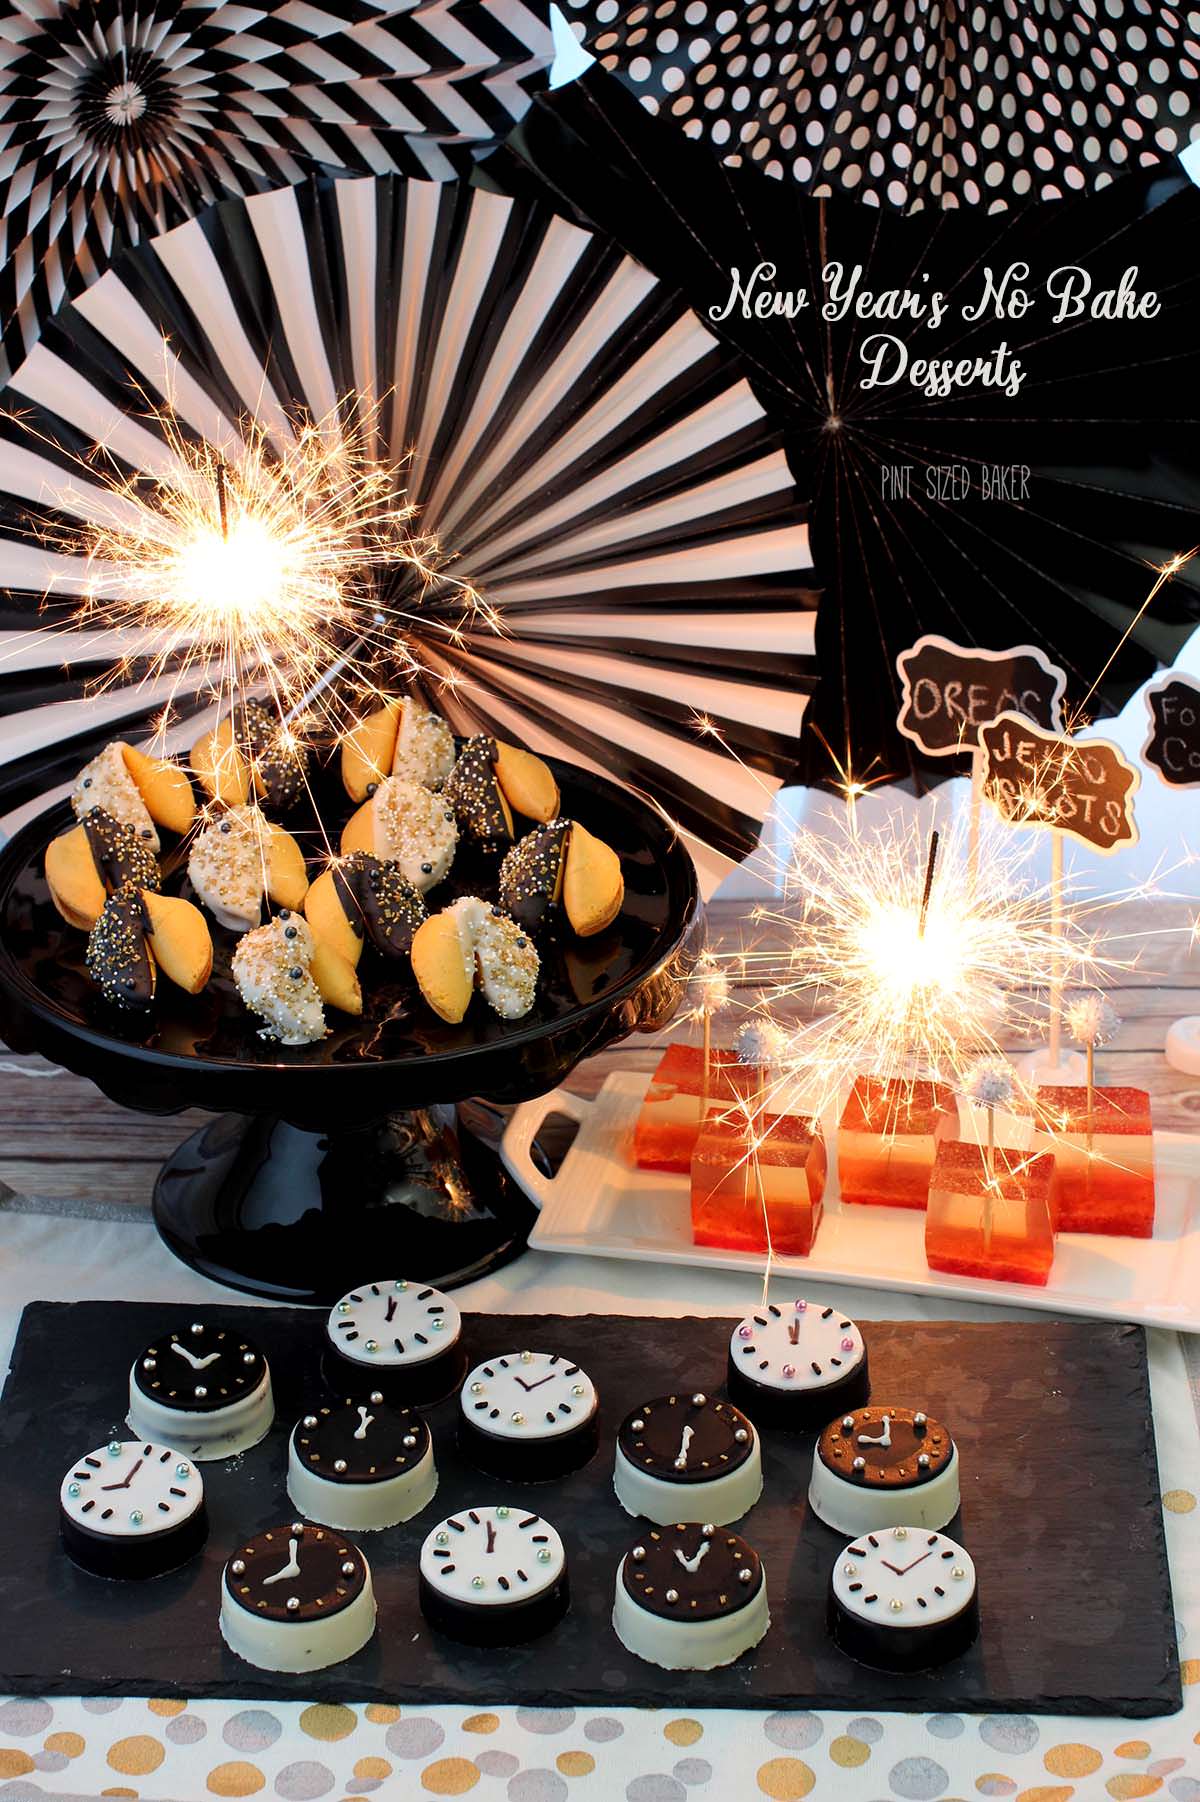 Celebrate like a kid again with Oreo Cookies, Jello and fortune cookies in this fun New Years No Bake Spread!